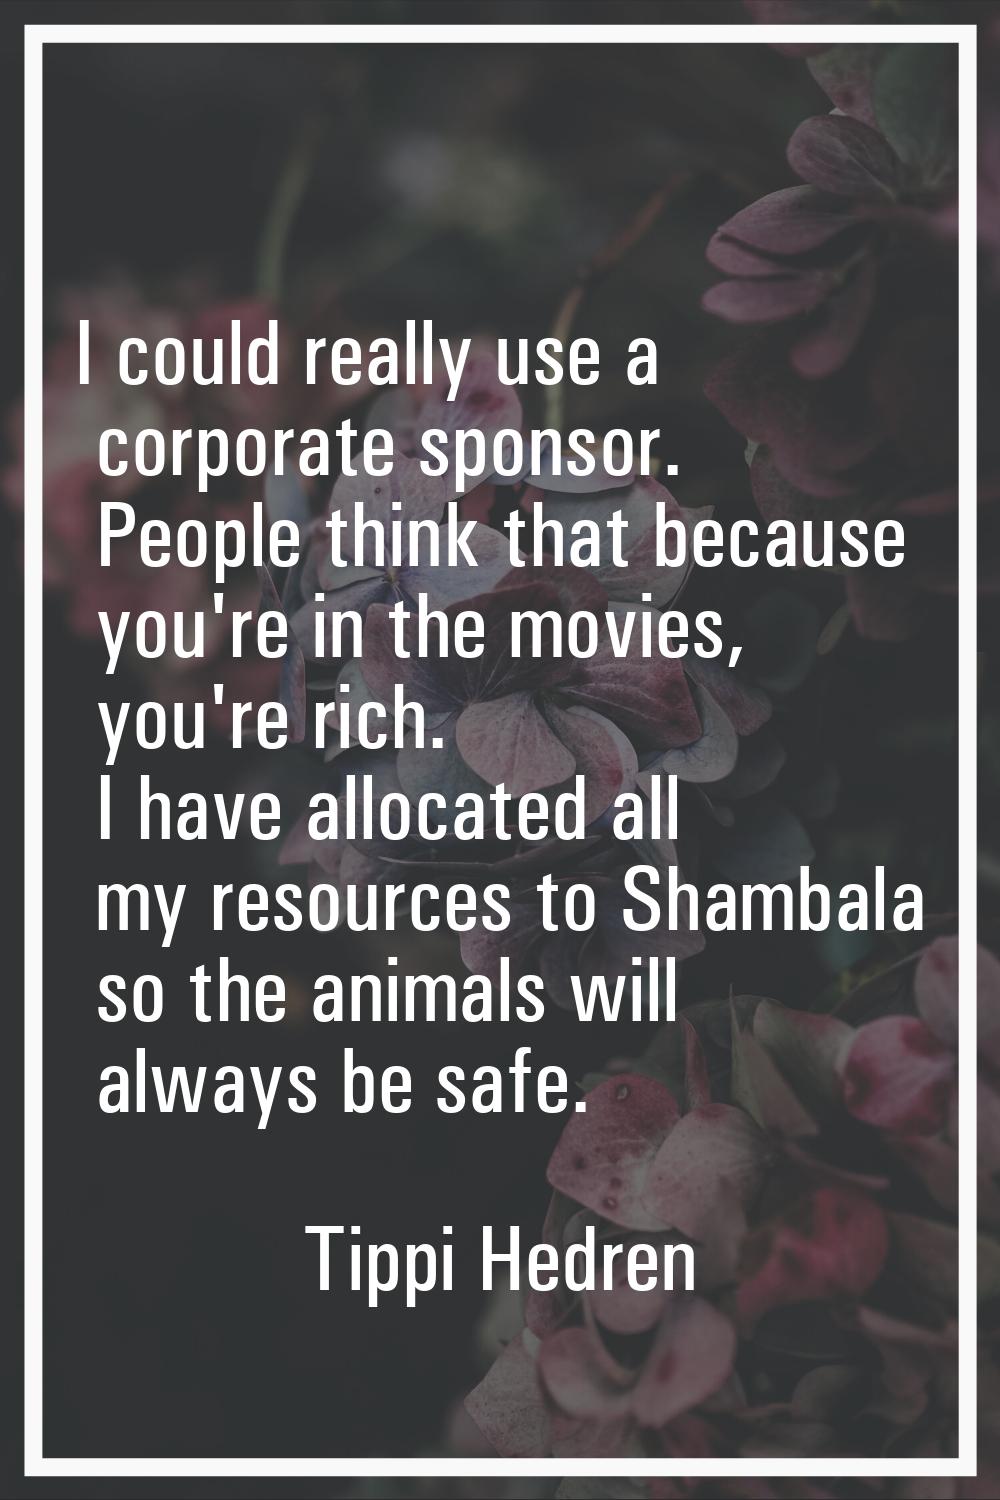 I could really use a corporate sponsor. People think that because you're in the movies, you're rich